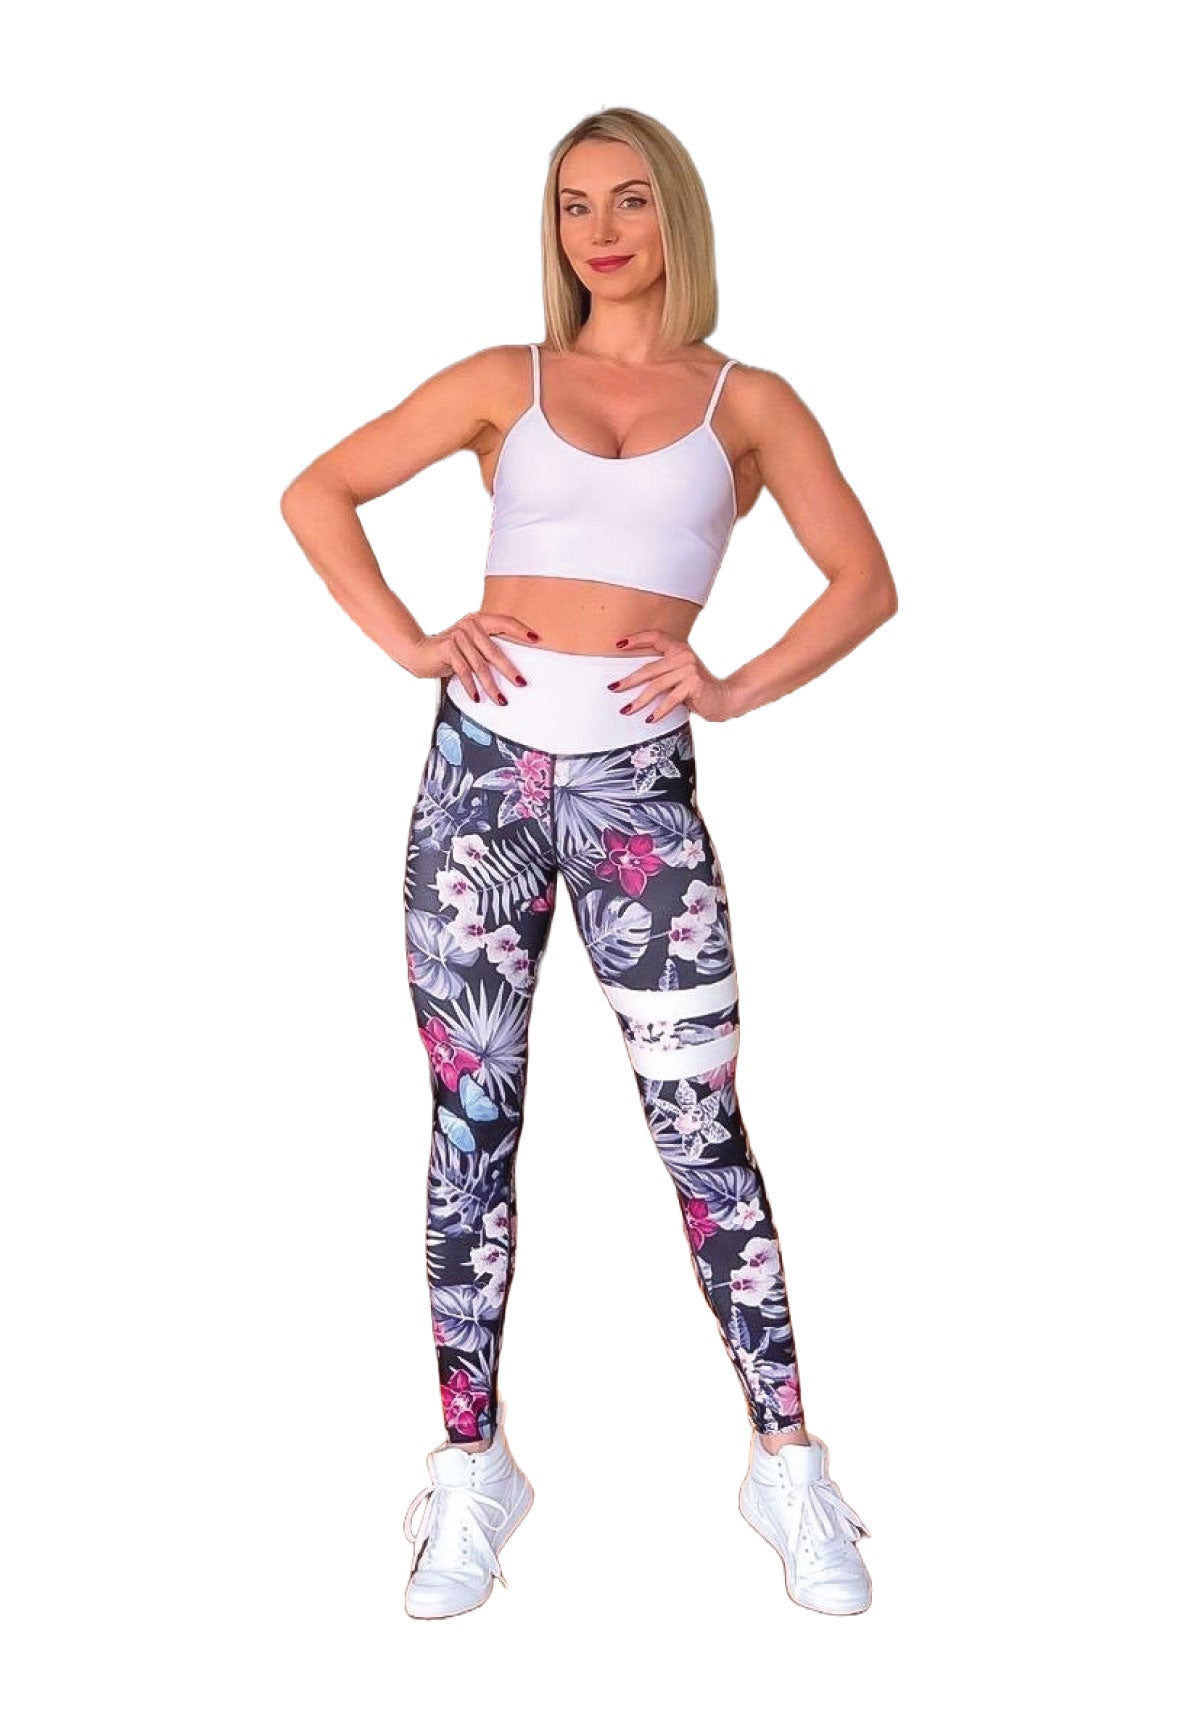 890 extra high waist leggings in black and white fan